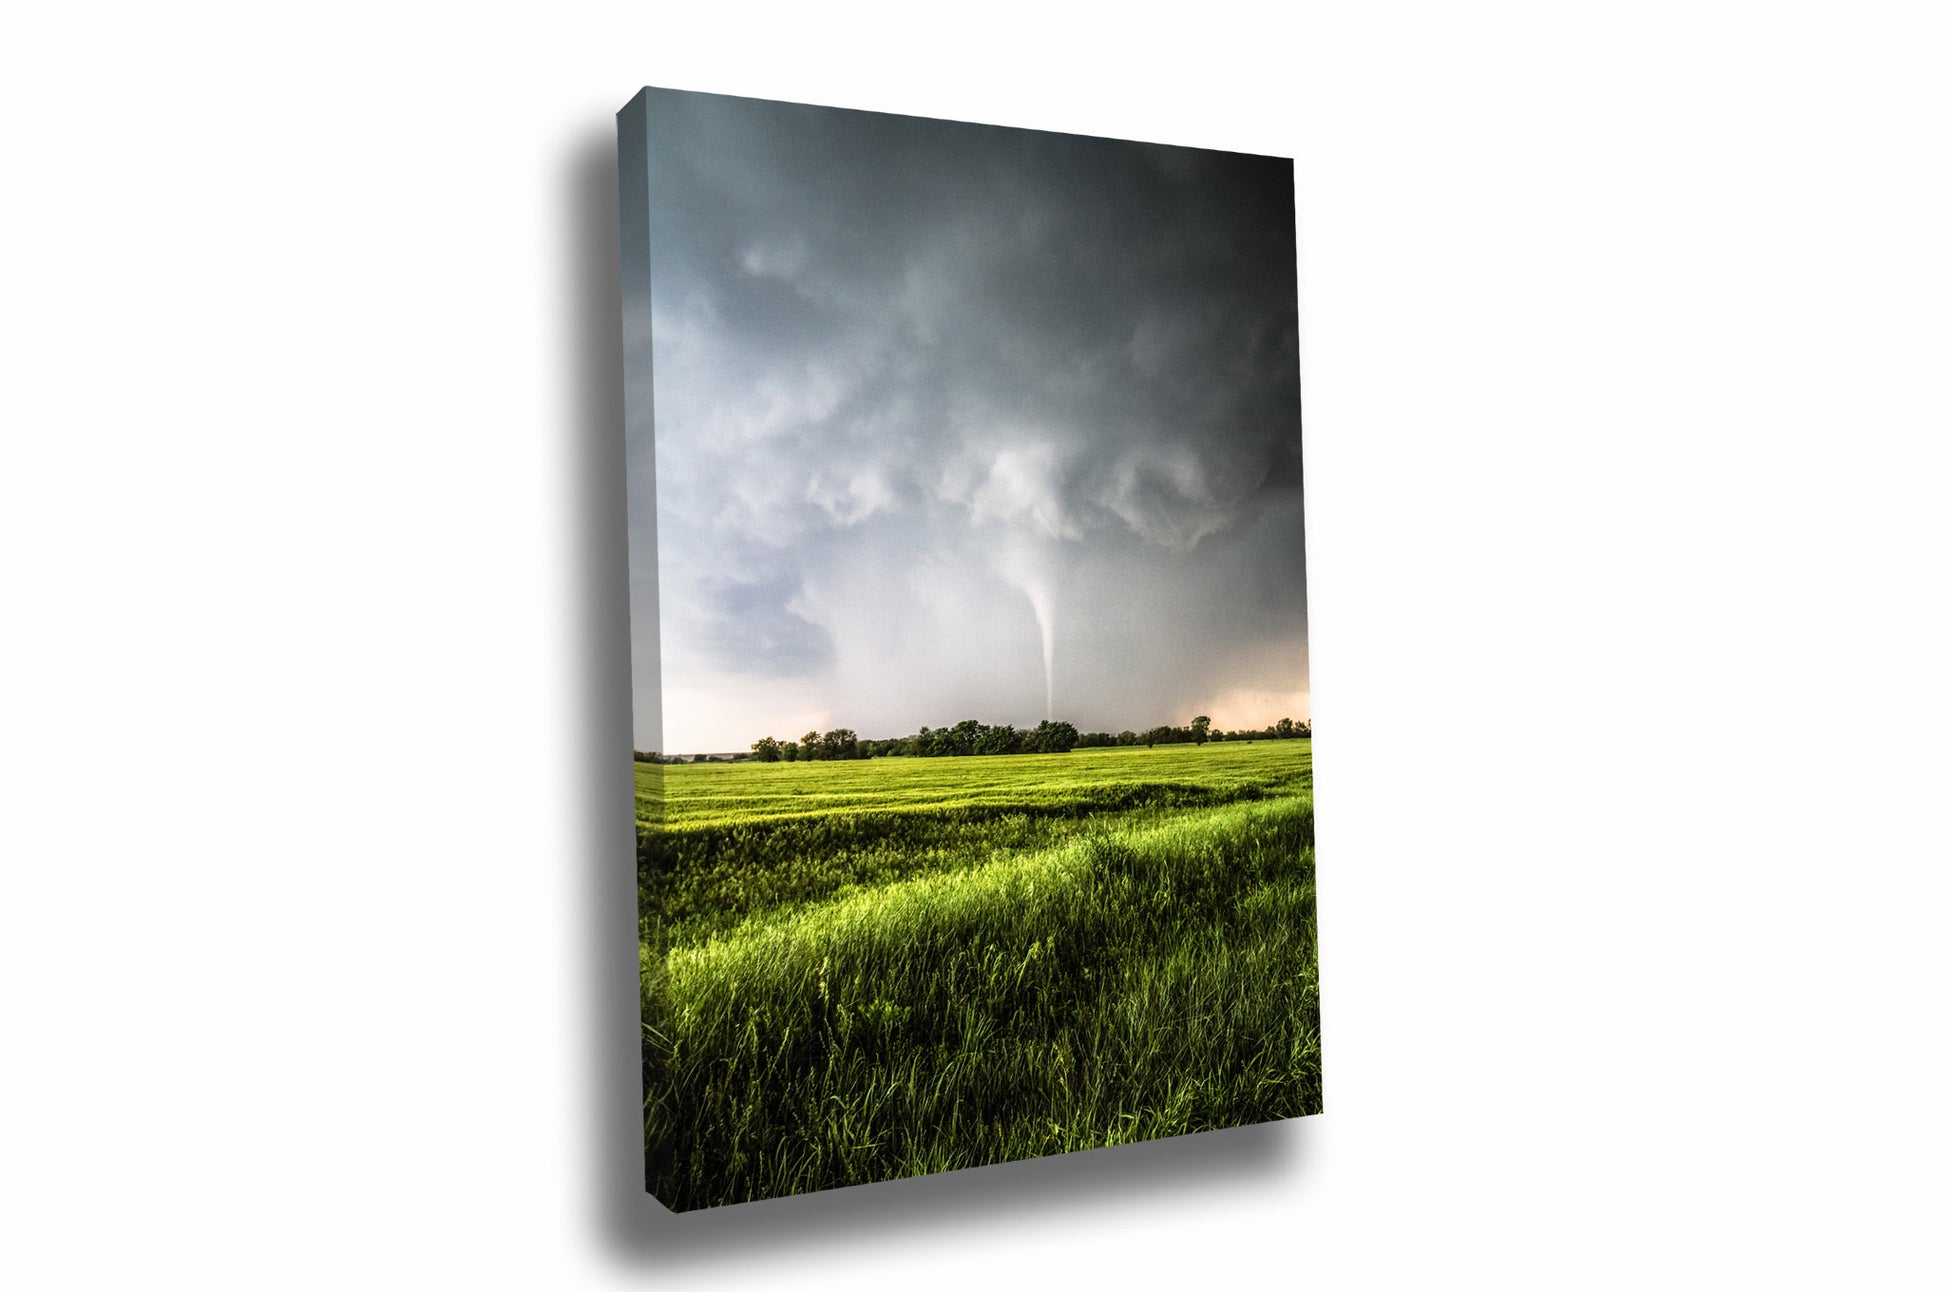 Vertical storm canvas wall art of a tornado emerging from heavy rain over a green wheat field on a stormy spring day in Kansas by Sean Ramsey of Southern Plains Photography.